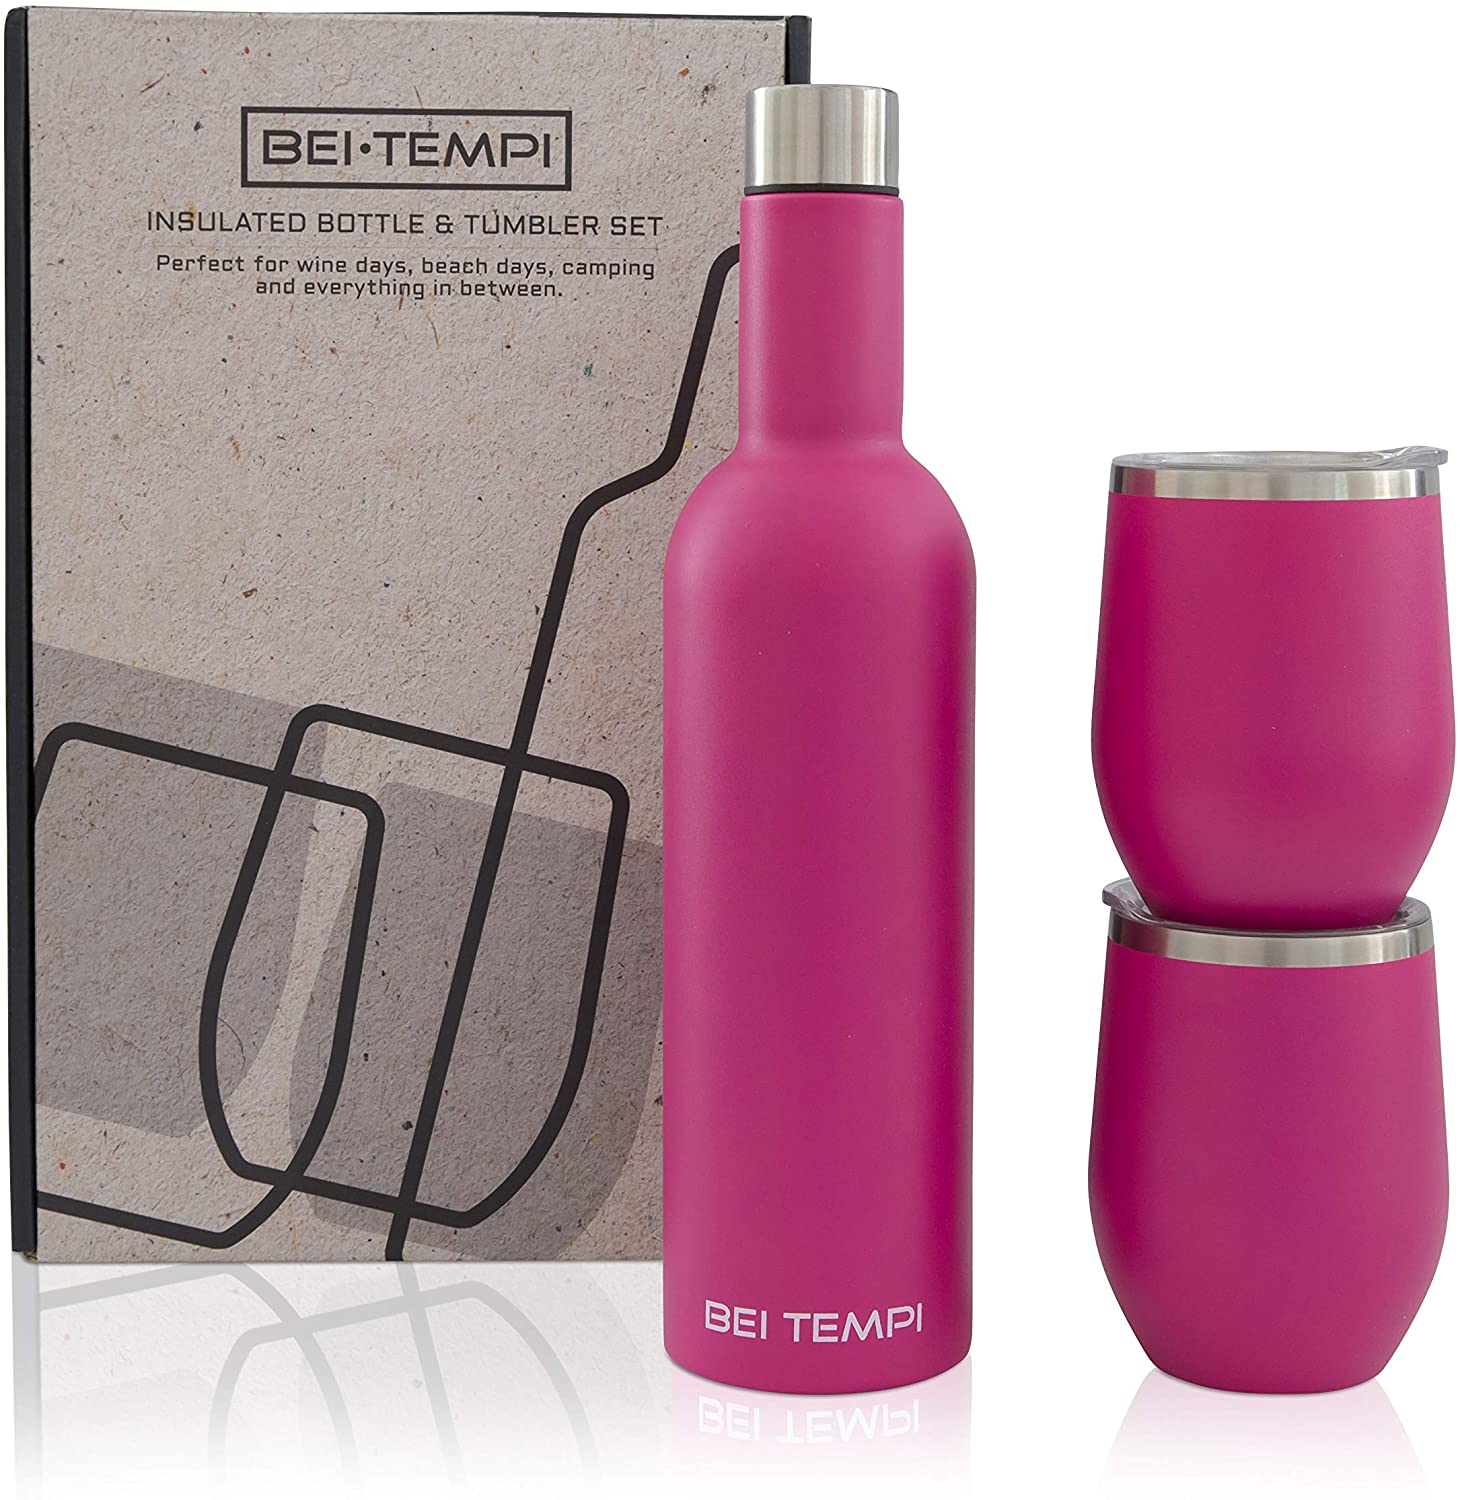 Insulated Bottle and Tumbler Set